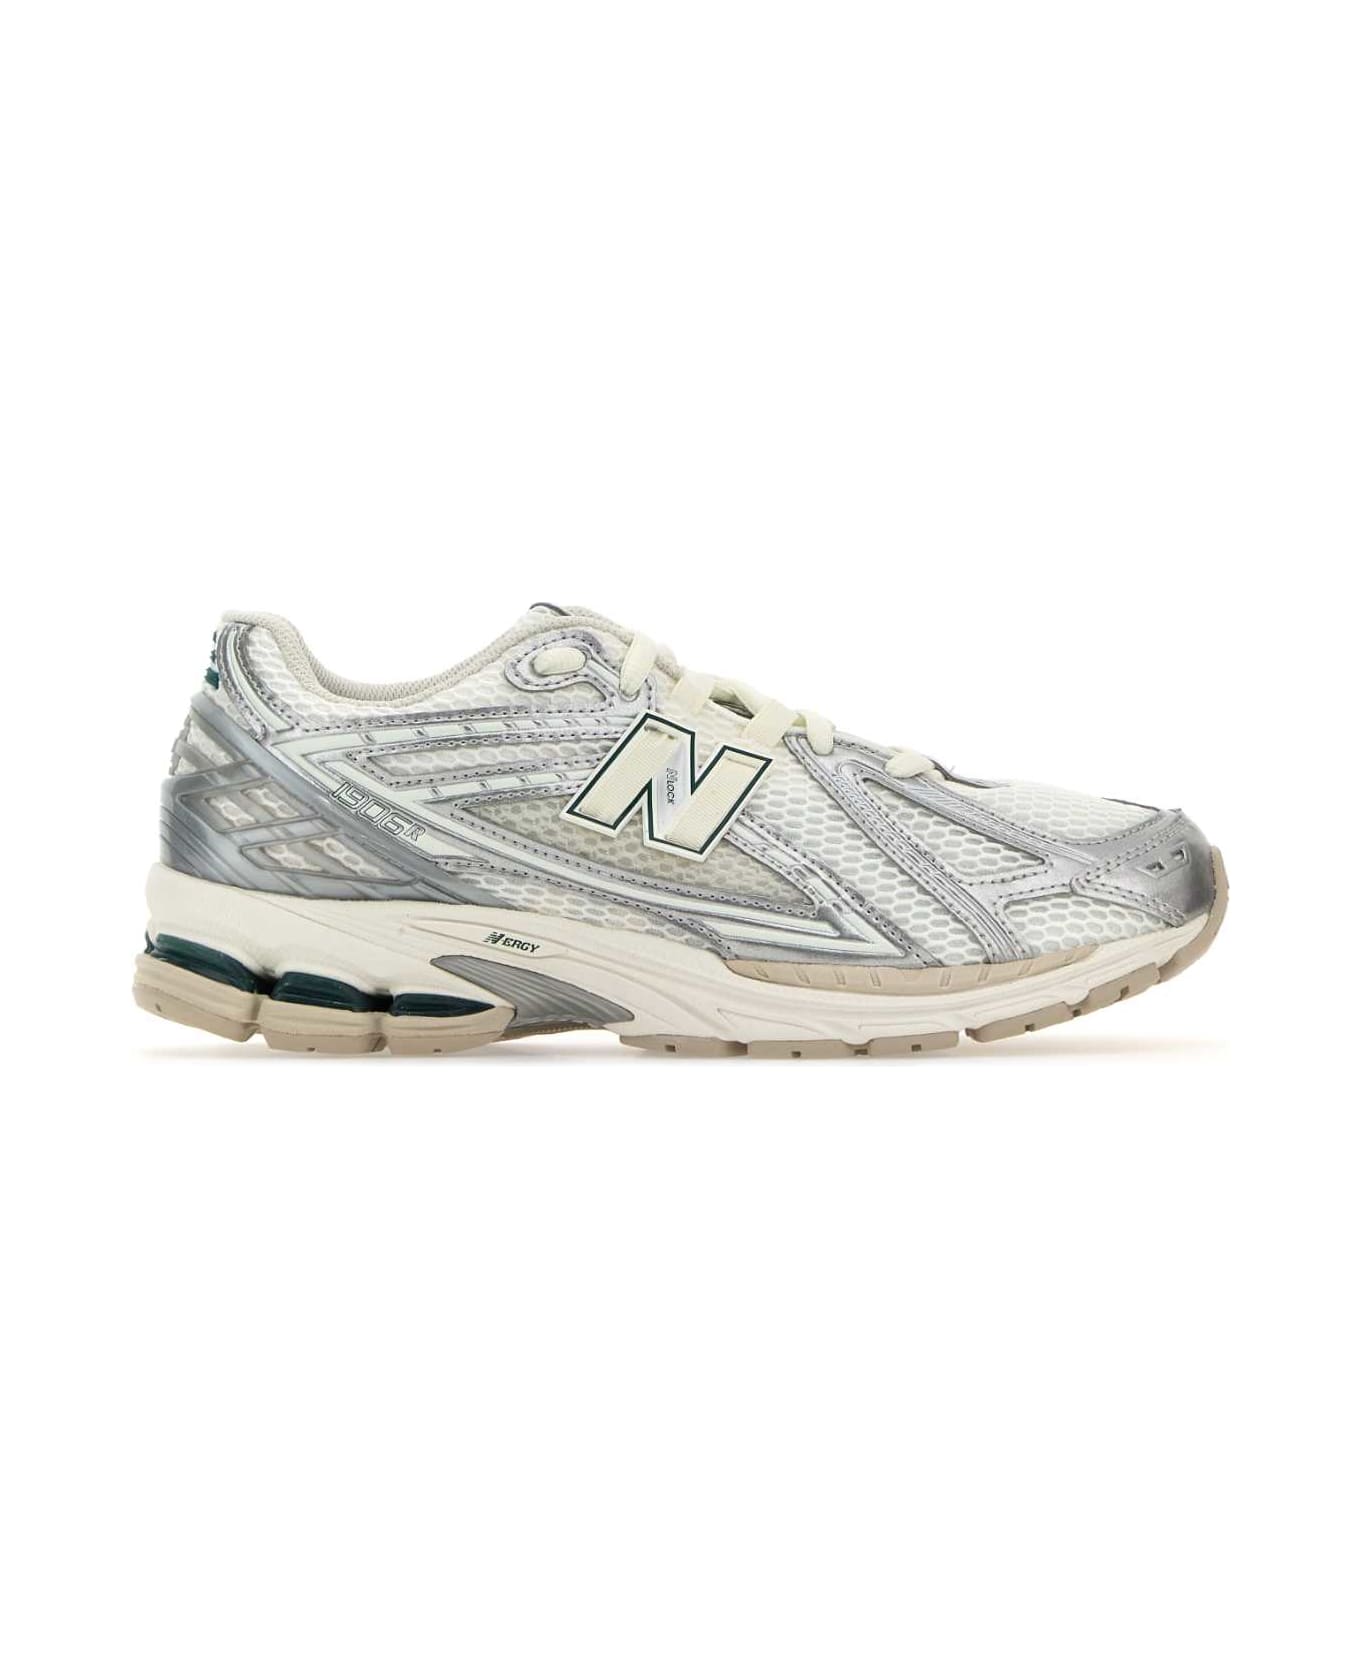 New Balance Multicolor Fabric And Mesh 1960r Sneakers - SILMETOFFWHI スニーカー